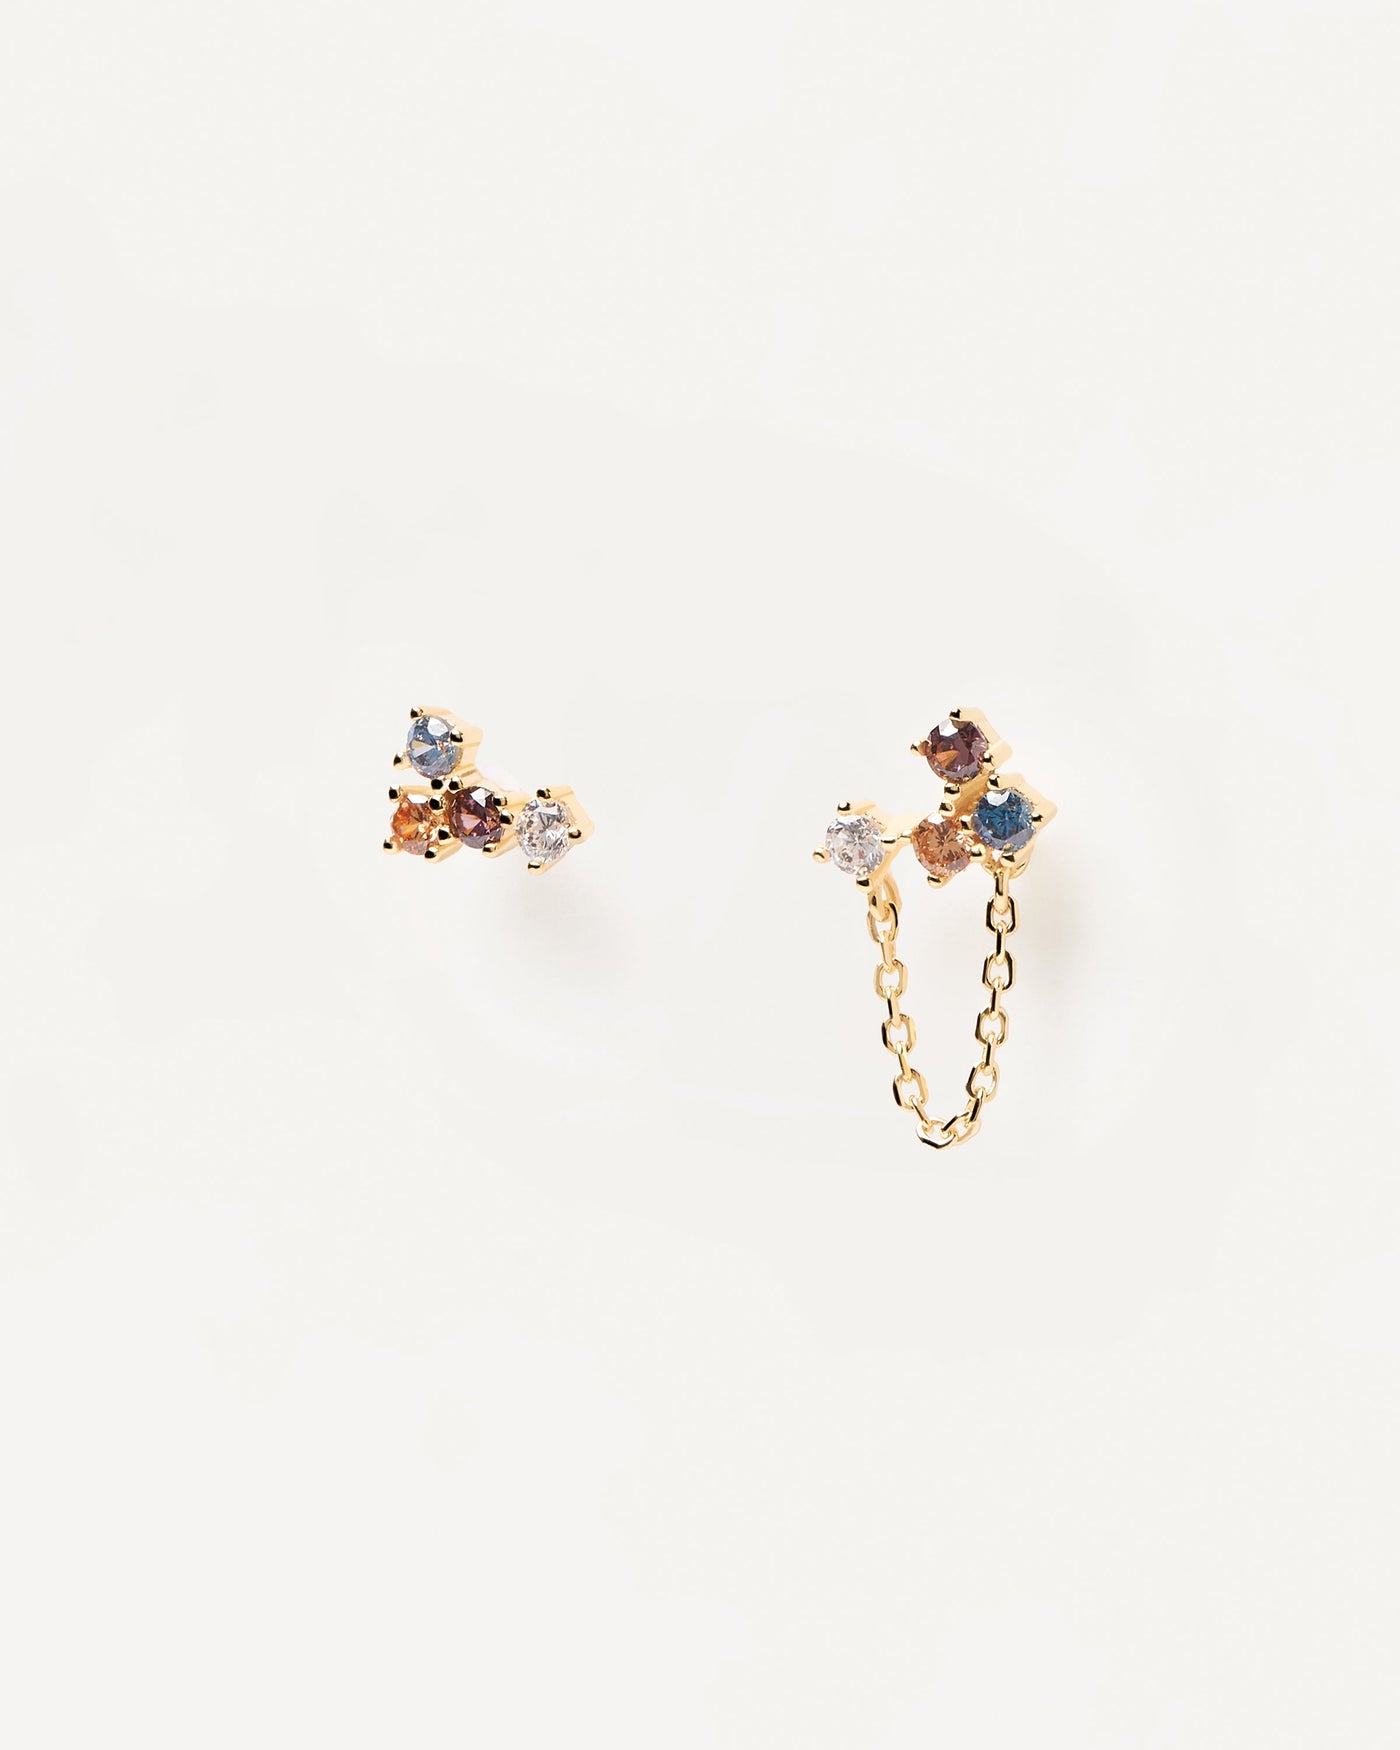 2023 Selection | Fox Earrings. Asymetrical stud earrings in gold-plated silver with five color stones. Get the latest arrival from PDPAOLA. Place your order safely and get this Best Seller. Free Shipping.